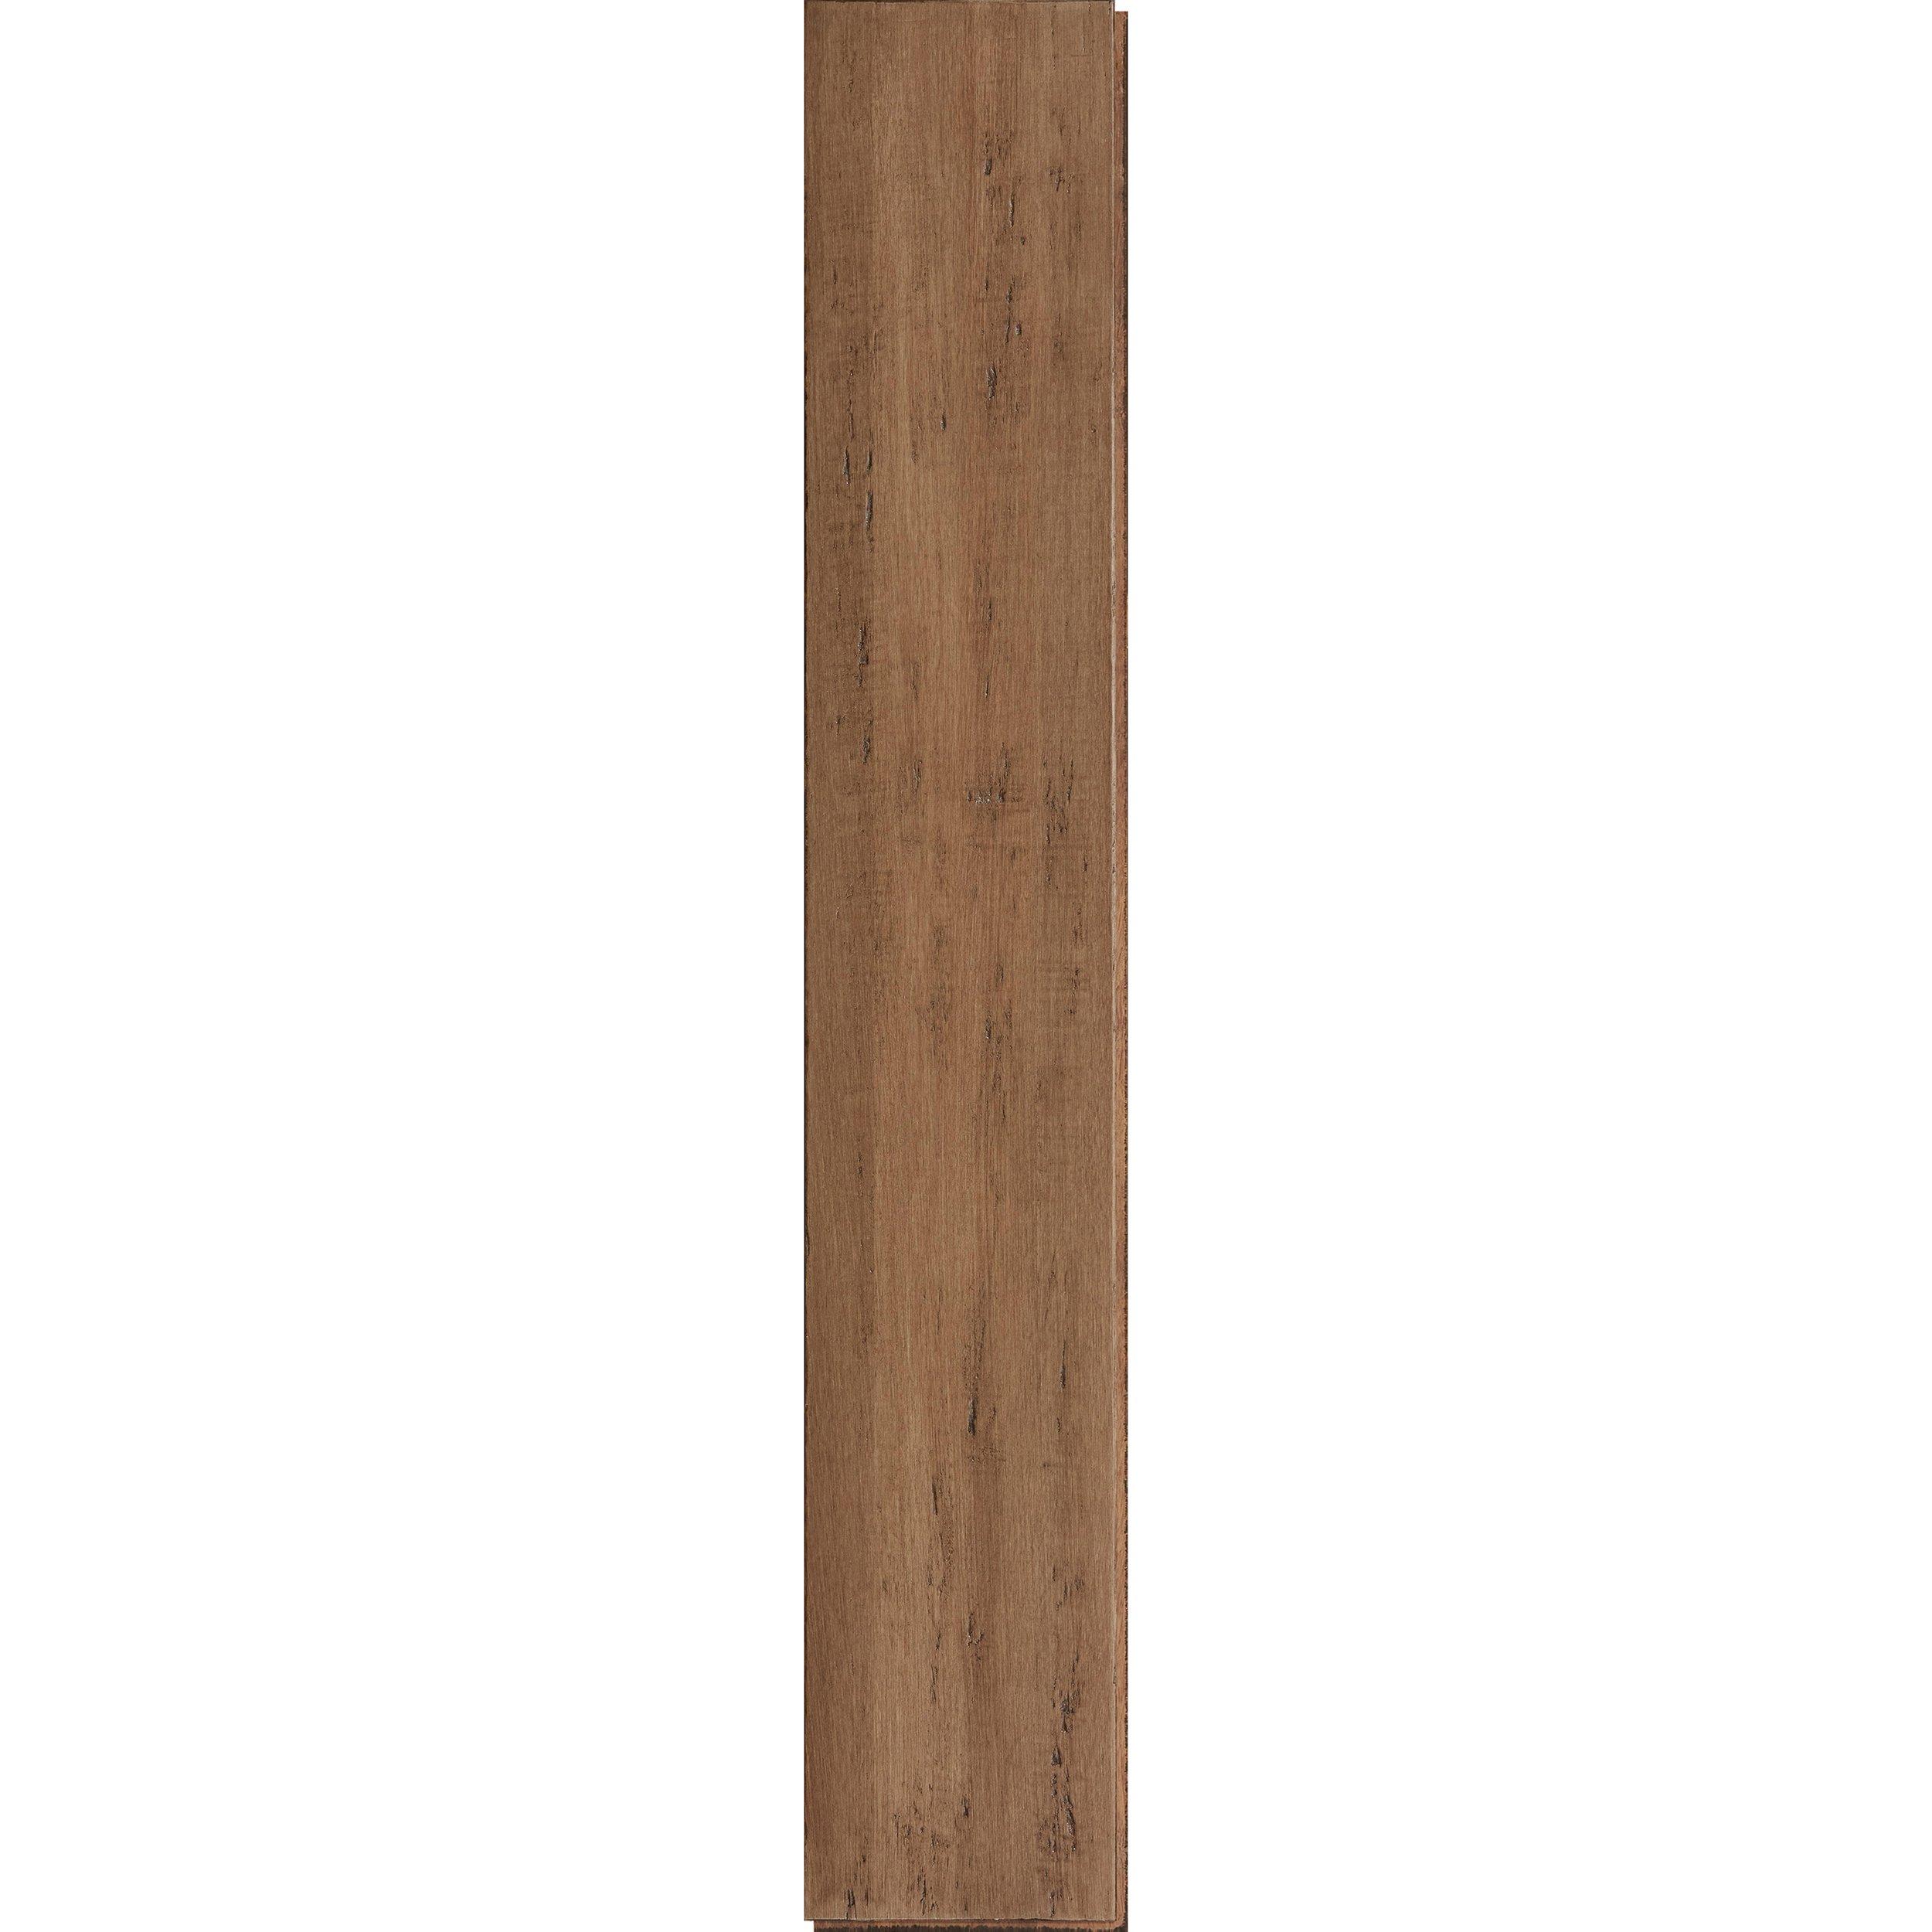 Desert Hill Distressed Solid Stranded Bamboo